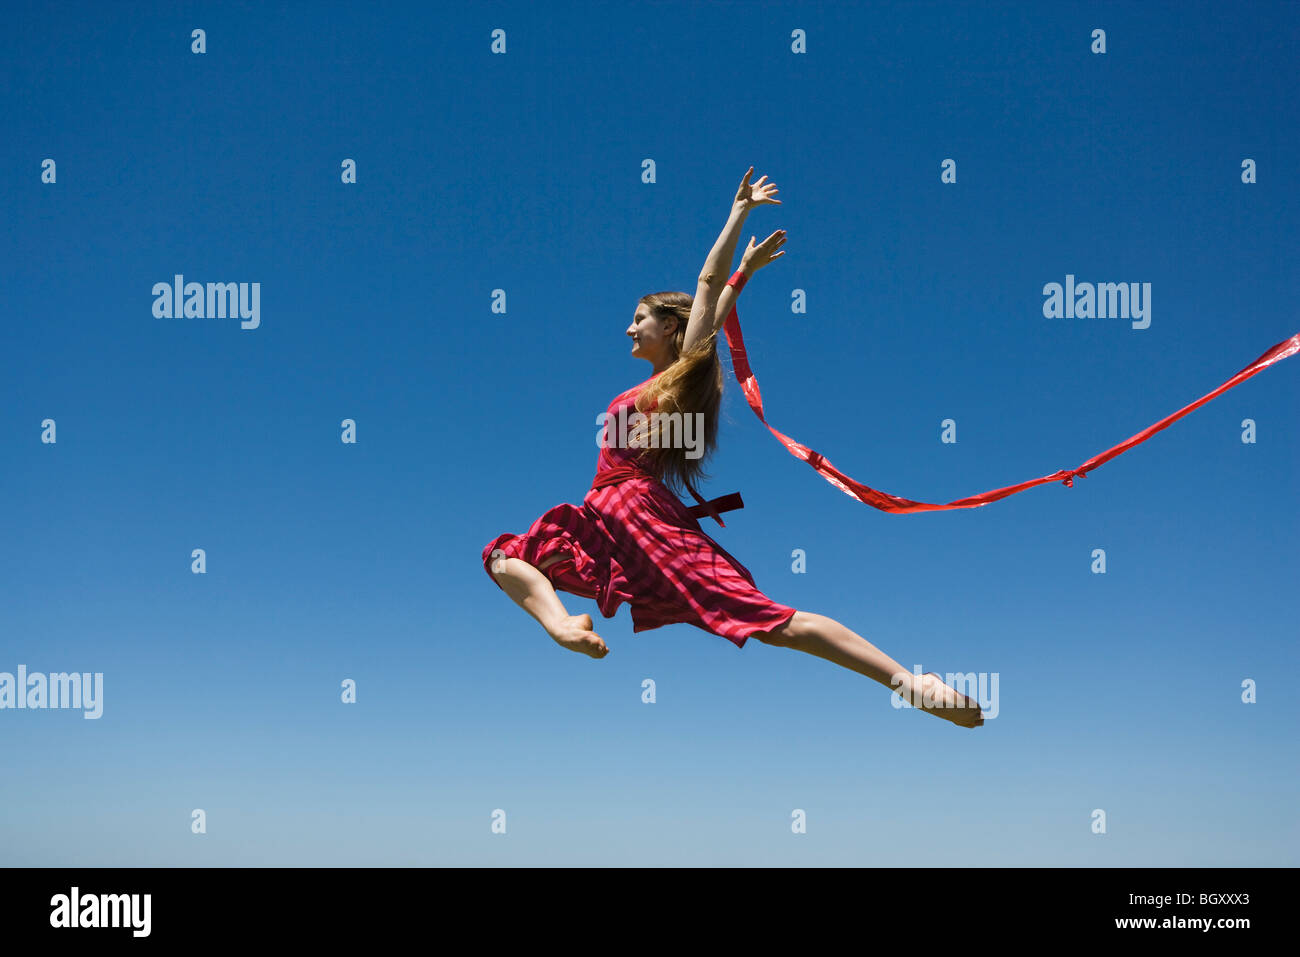 Young woman leaping, midair Stock Photo